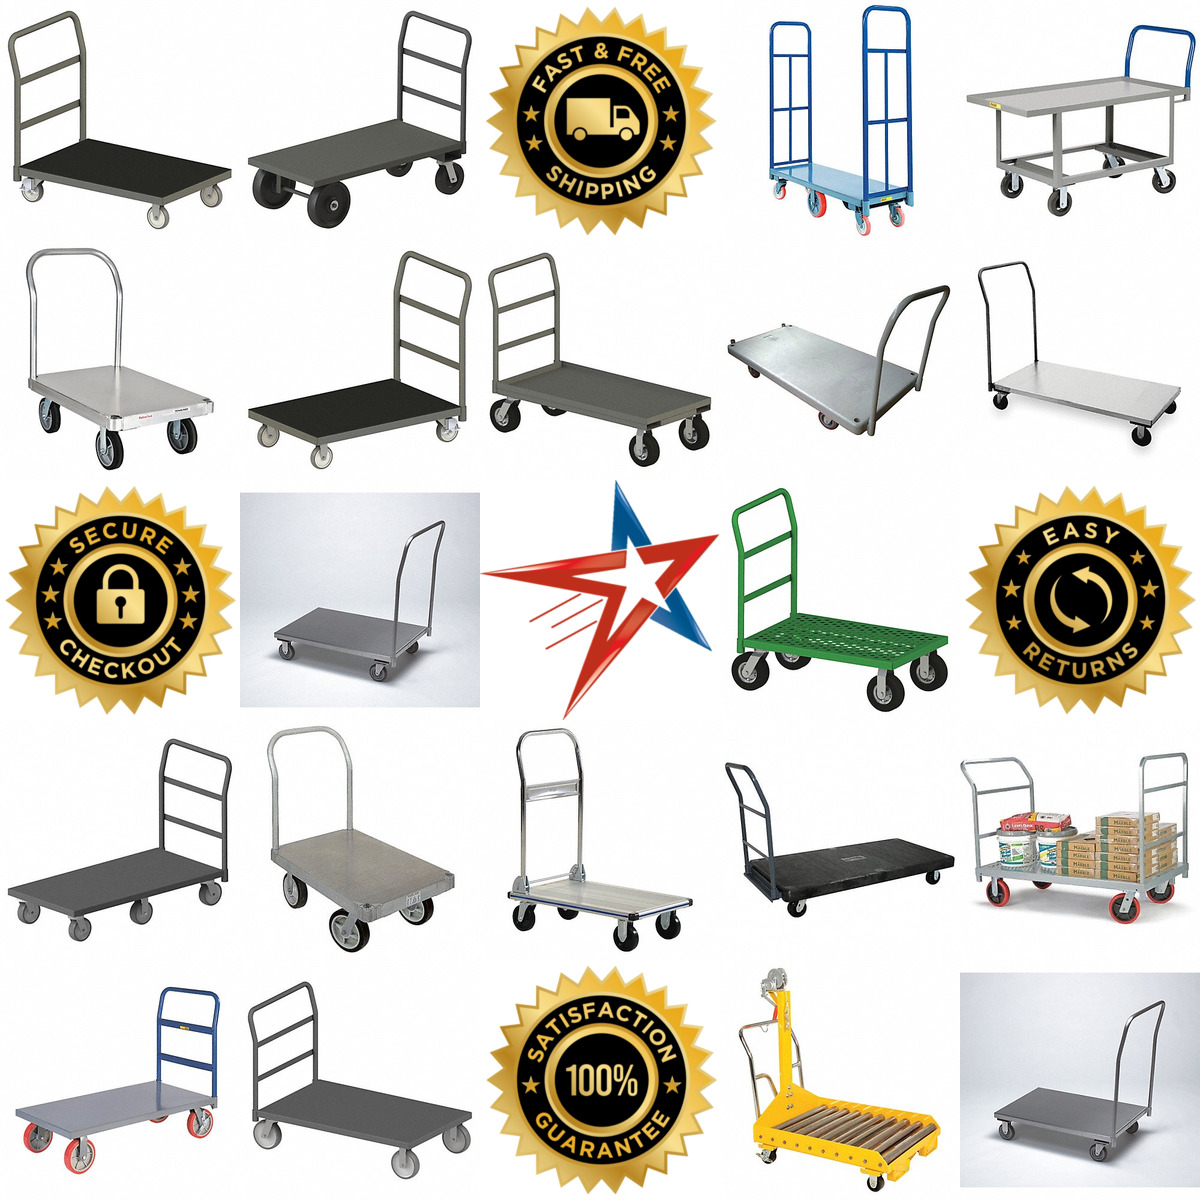 A selection of Platform Trucks products on GoVets